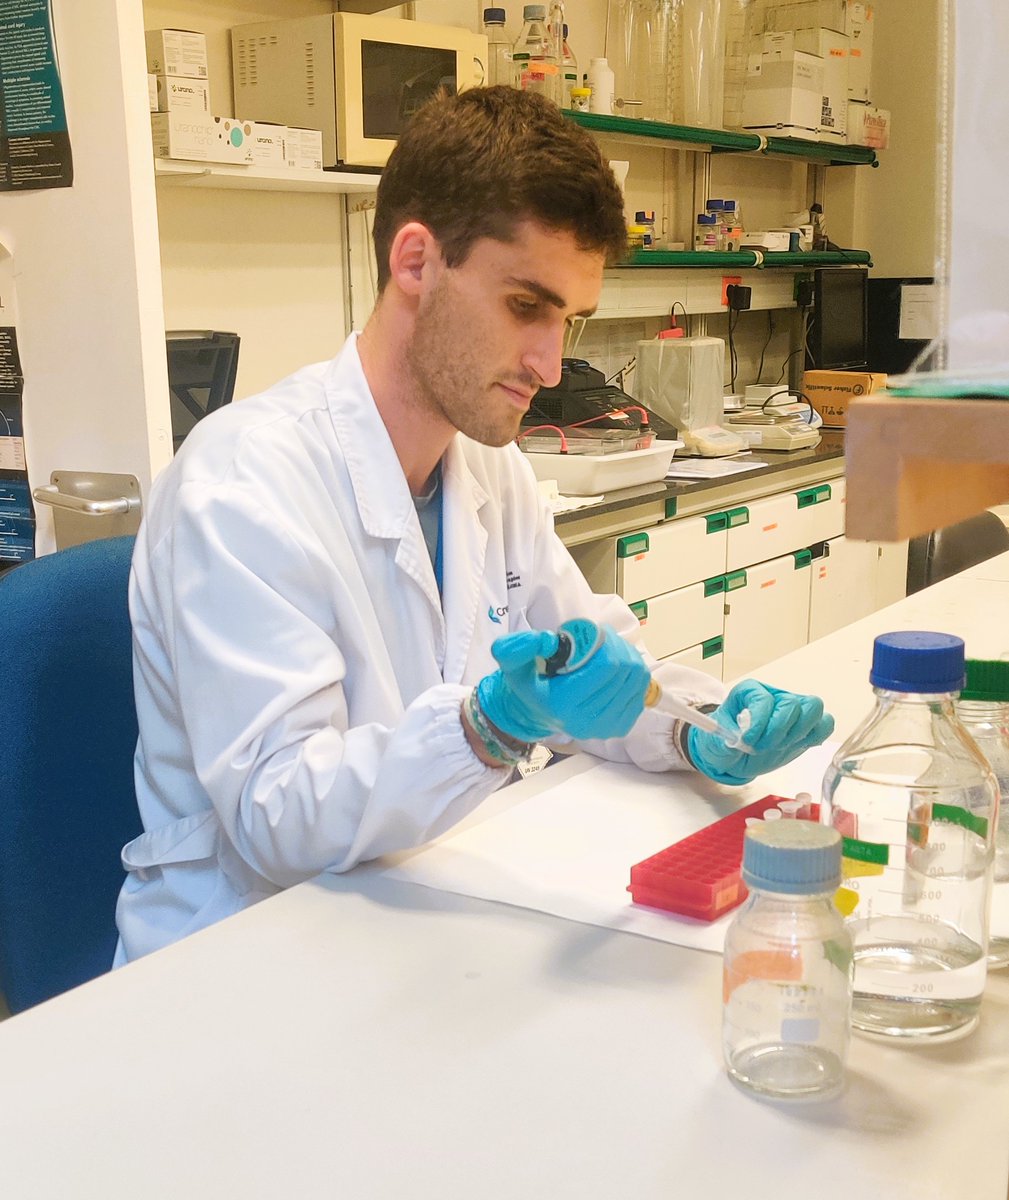 We are happy to announce ✨✨ @MarcEstarellas has received an #FPU grant - @UniversidadGob to do his PhD thesis in our lab! He will be working to develop a #cellulartherapy for #Huntingtonsdisease.
Stay tuned to learn more about his research.
@UniBarcelona #Unibarcelona #ATMPs